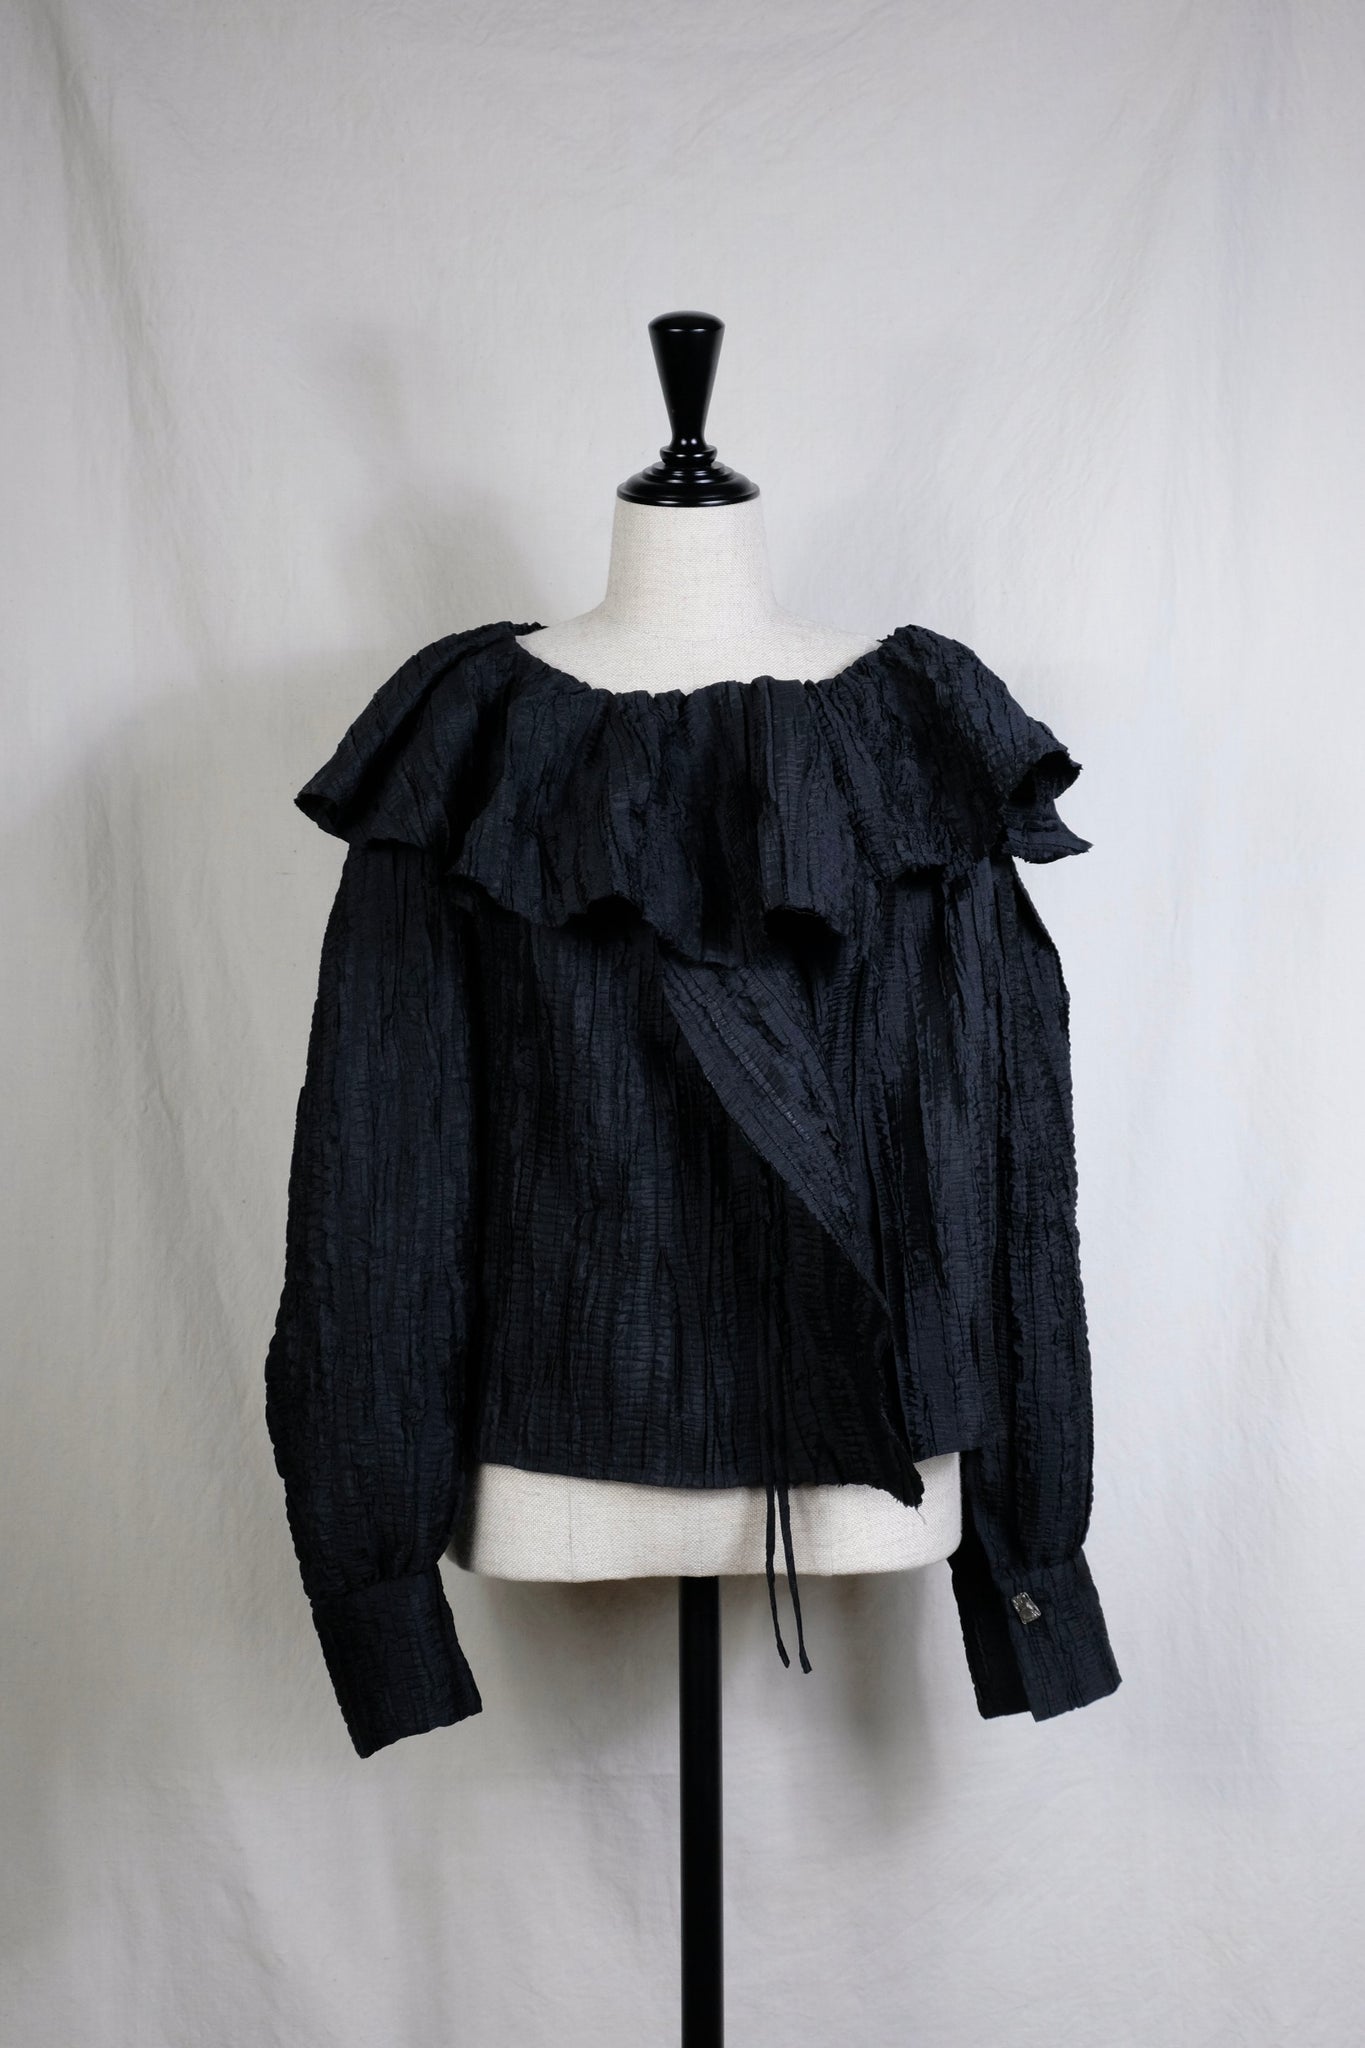 CURRENTAGE"RAFFLE FRILL BLOUSE"